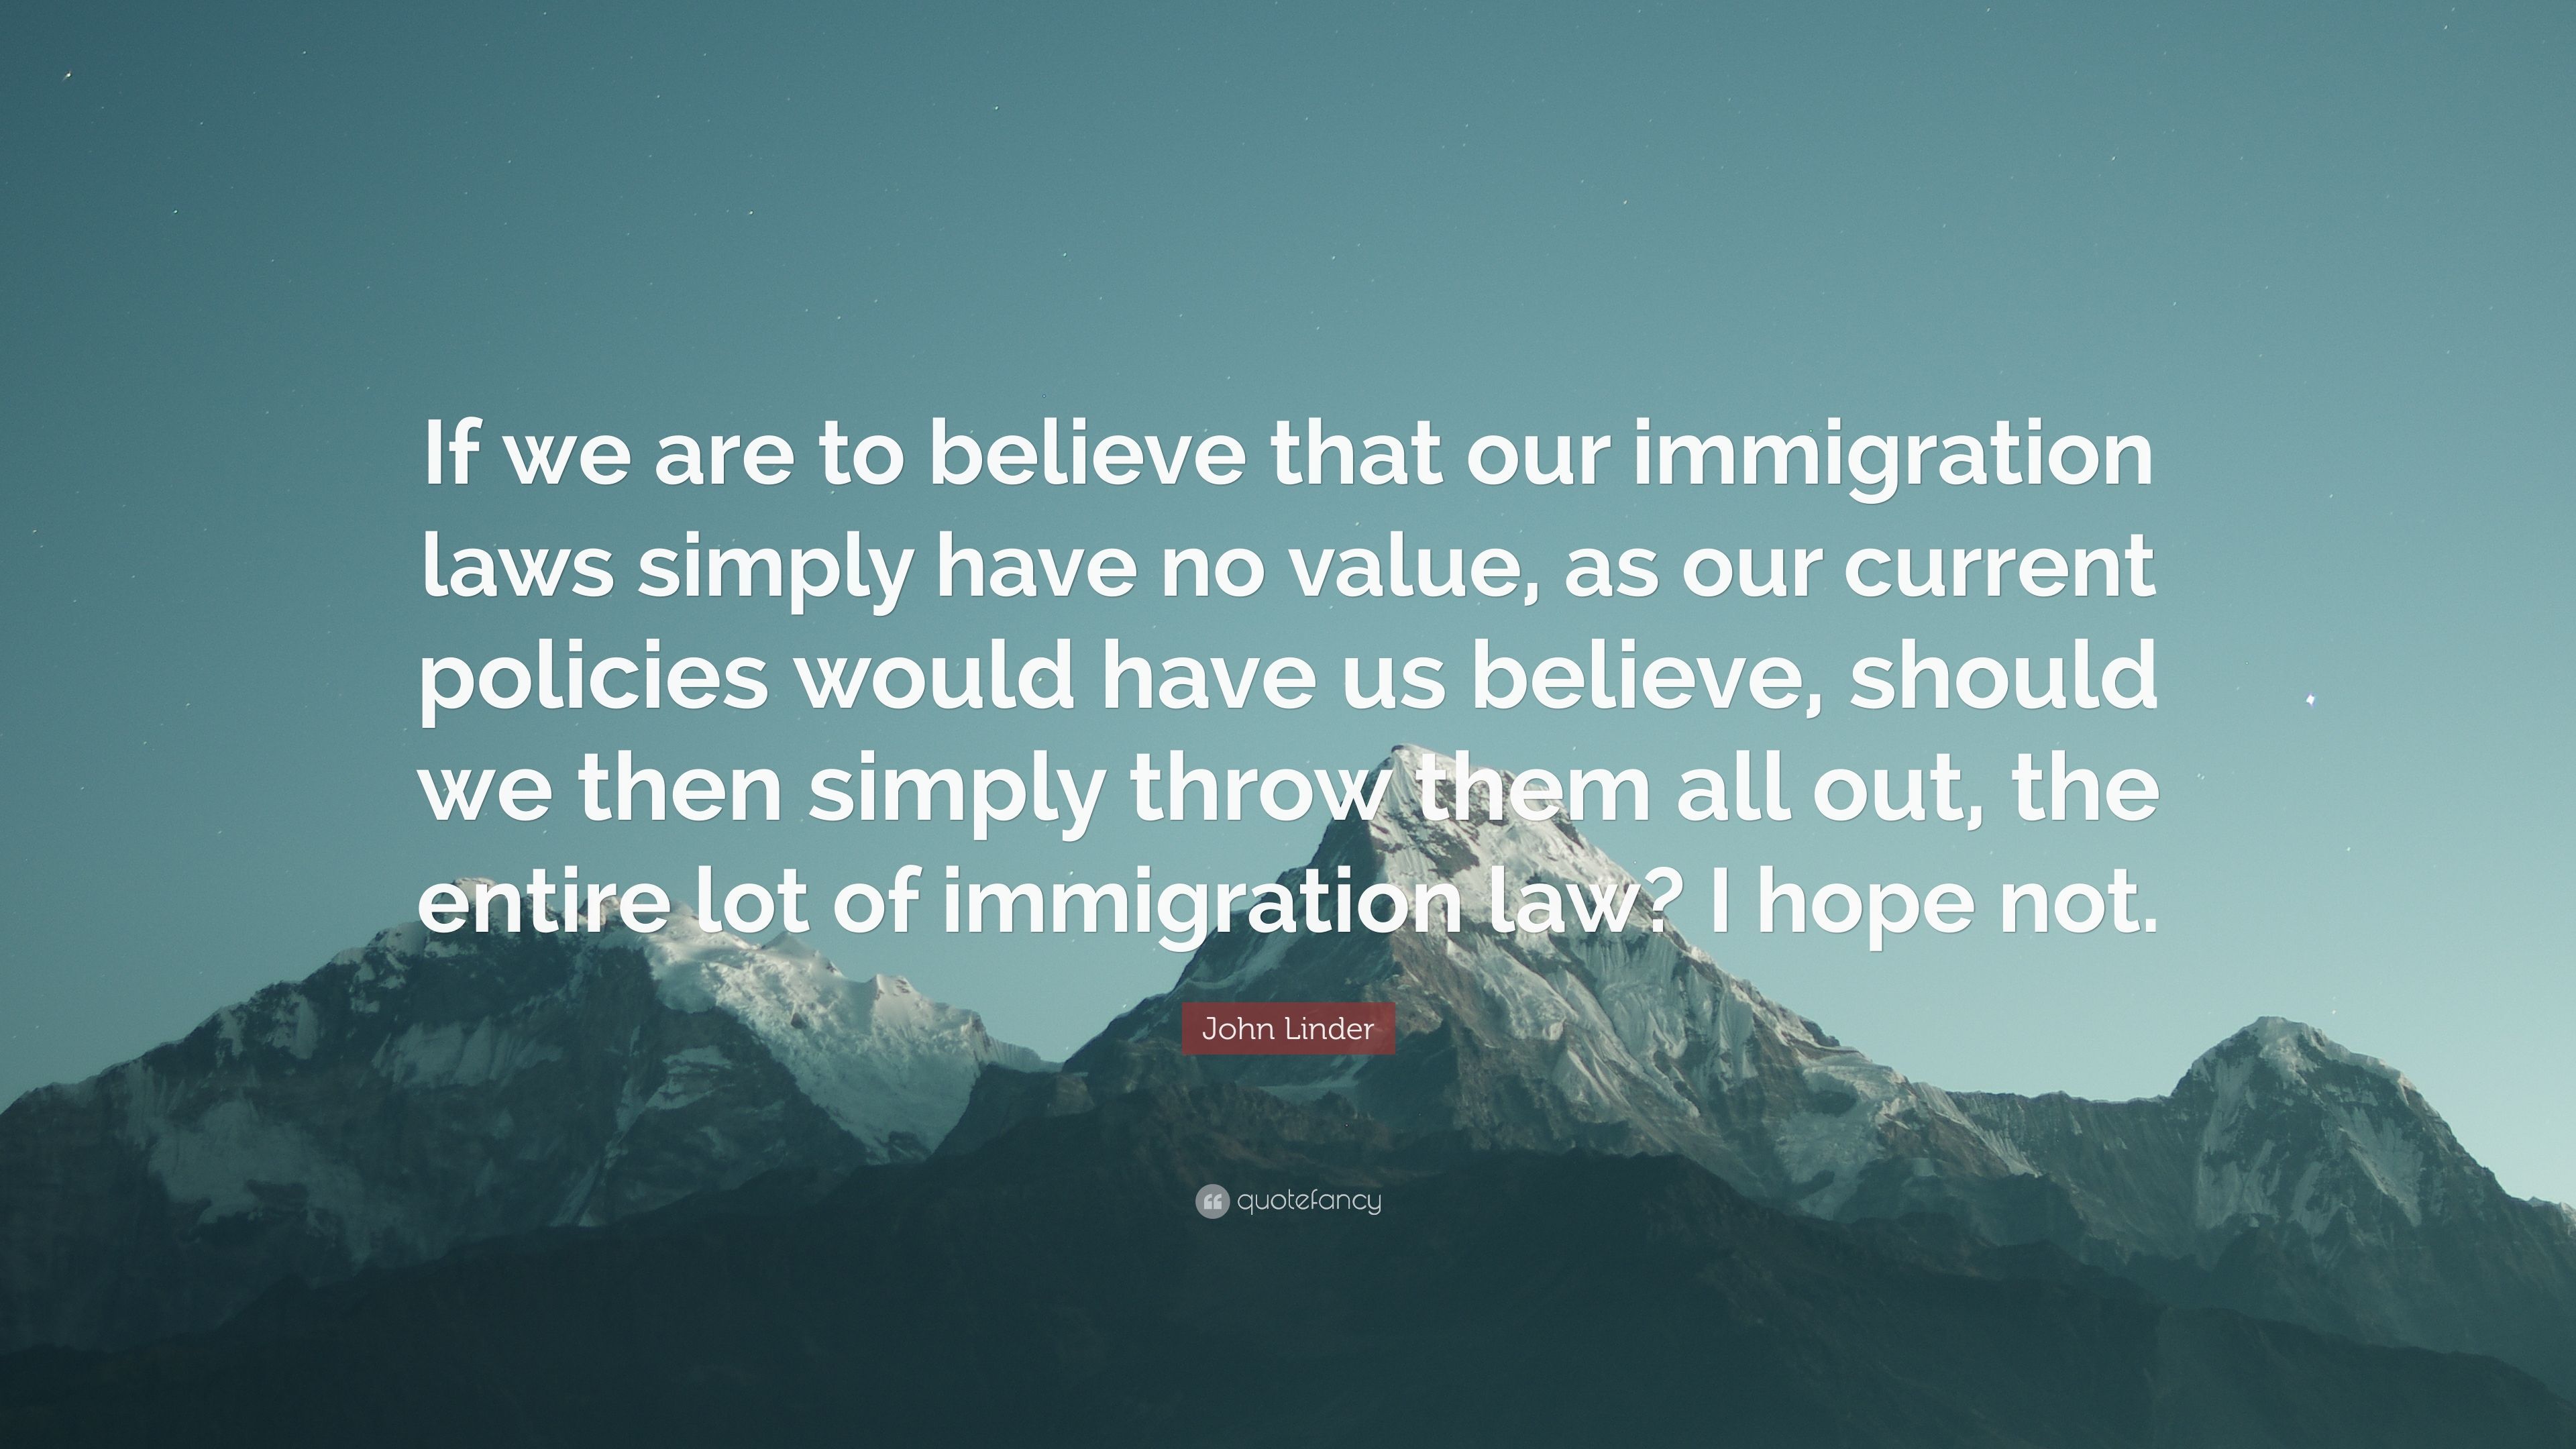 John Linder Quote: “If we are to believe that our immigration laws simply have no value, as our current policies would have us believe, shou.” (7 wallpaper)